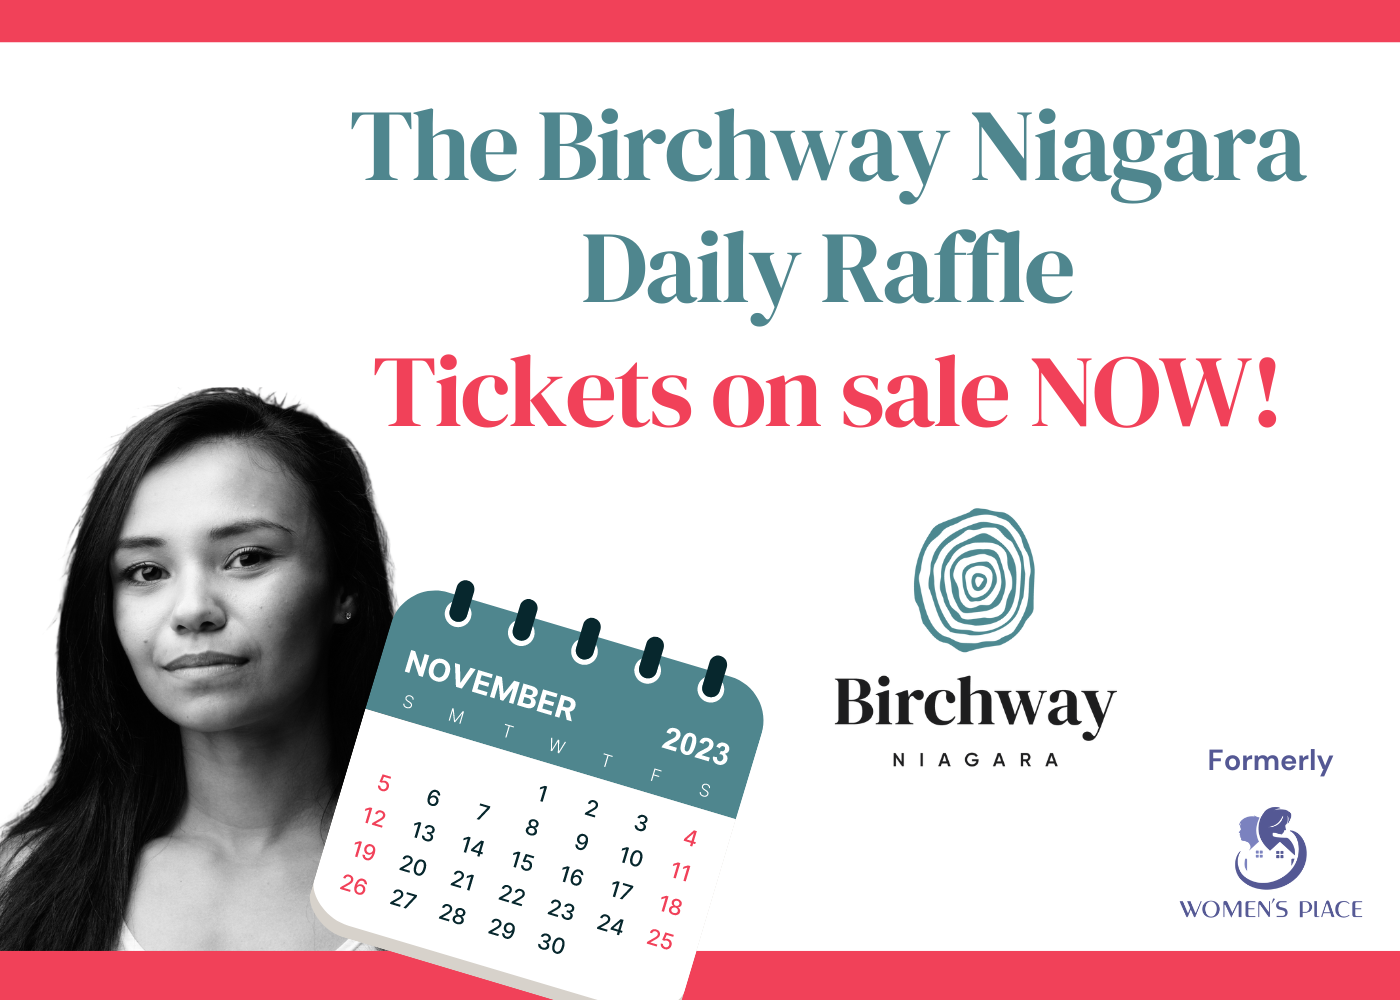 Ad promoting Birchway Niagara's Daily Raffle. Tickets on sale now. Images include a young asian woman looking at camera, a graphic of a calendar showing November 23 and the logos of Birchway Niagara and its former logo for Women's Place